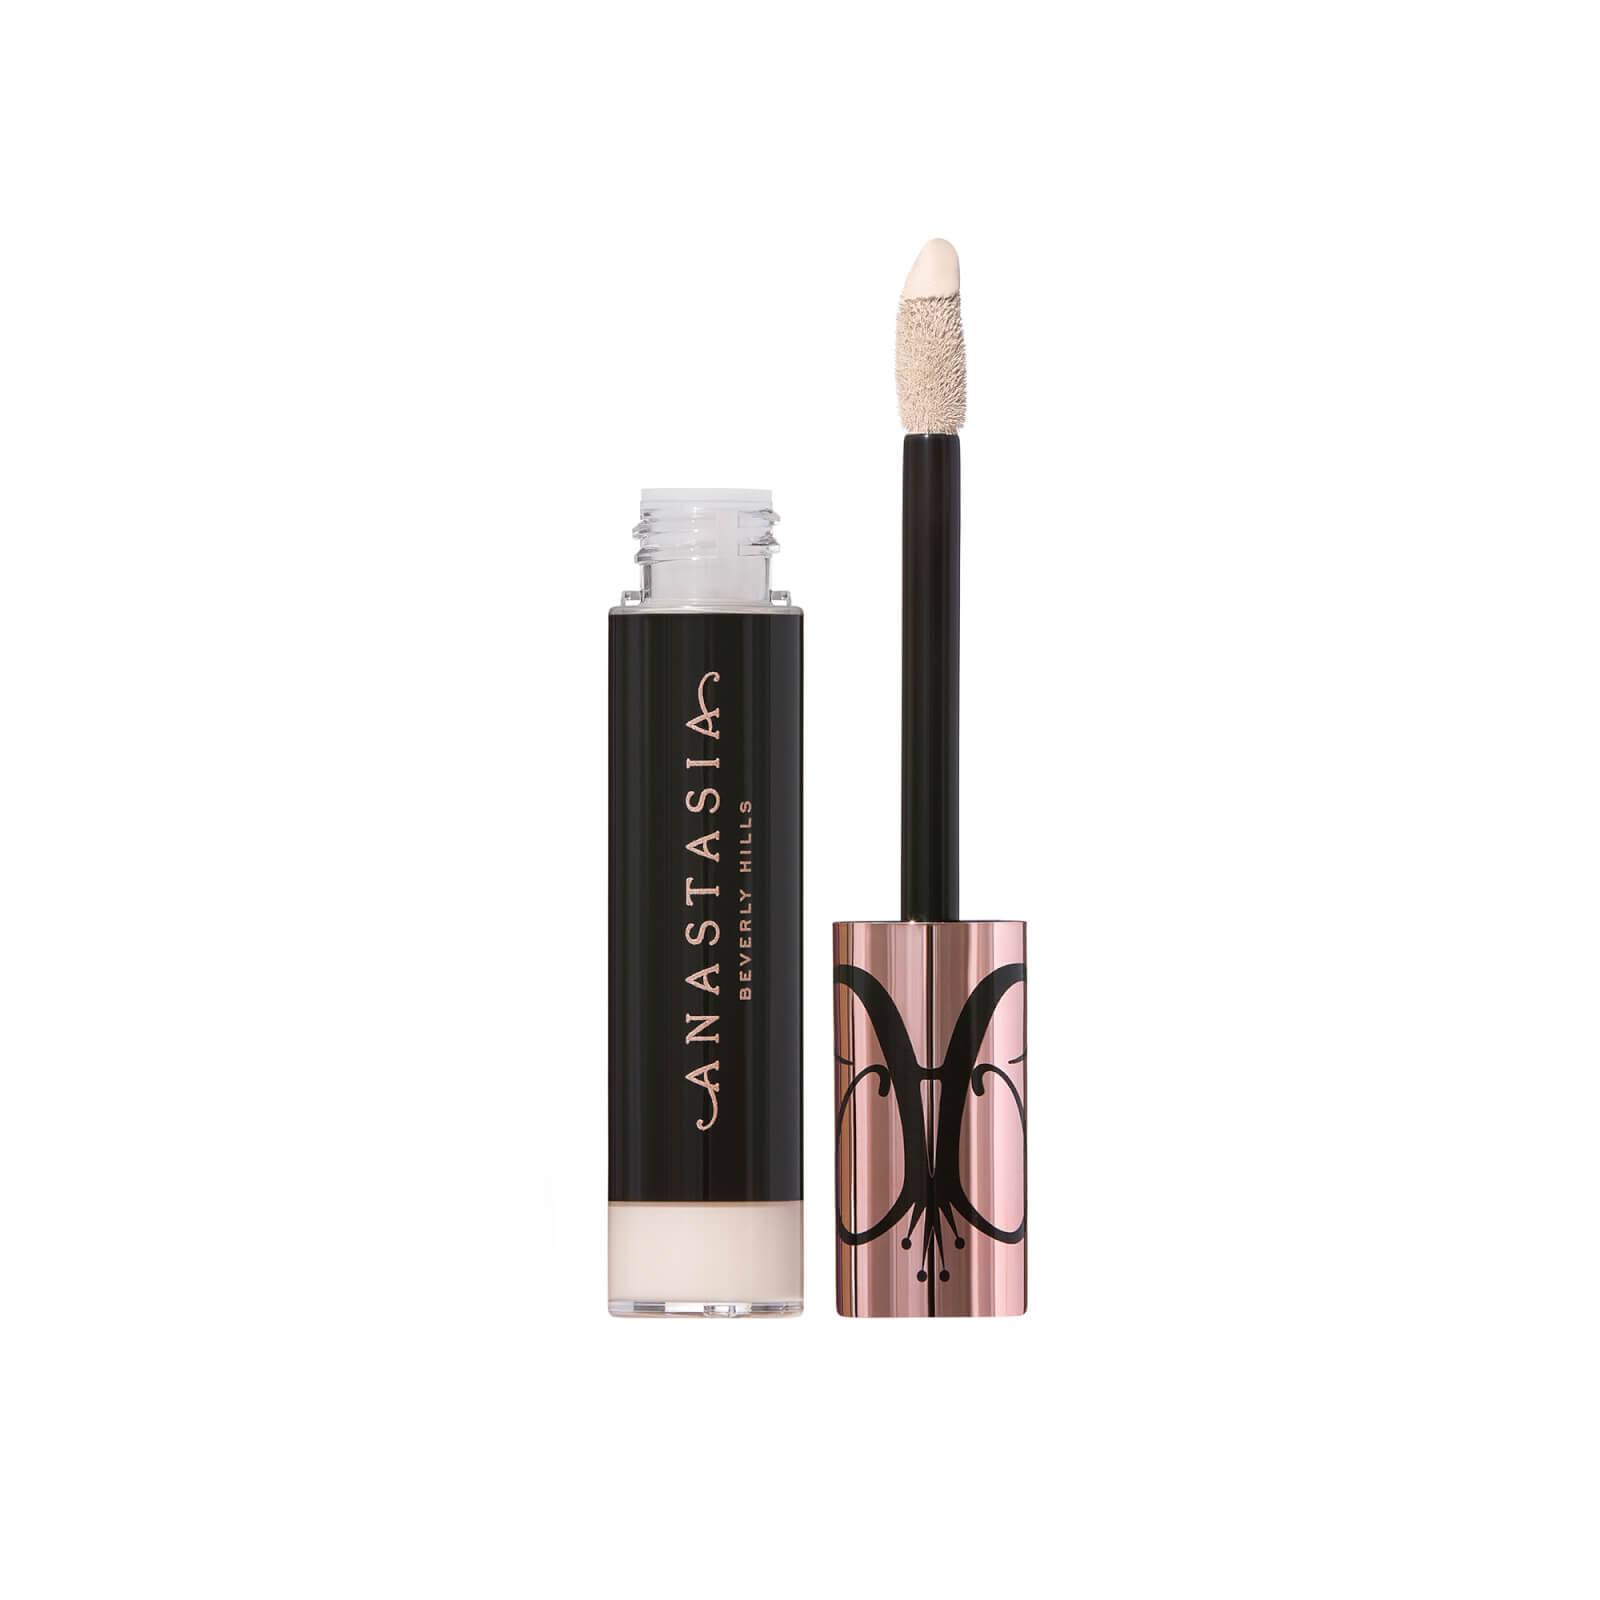 Anastasia Beverly Hills Magic Touch Concealer 12ml (Various Shades) - 1